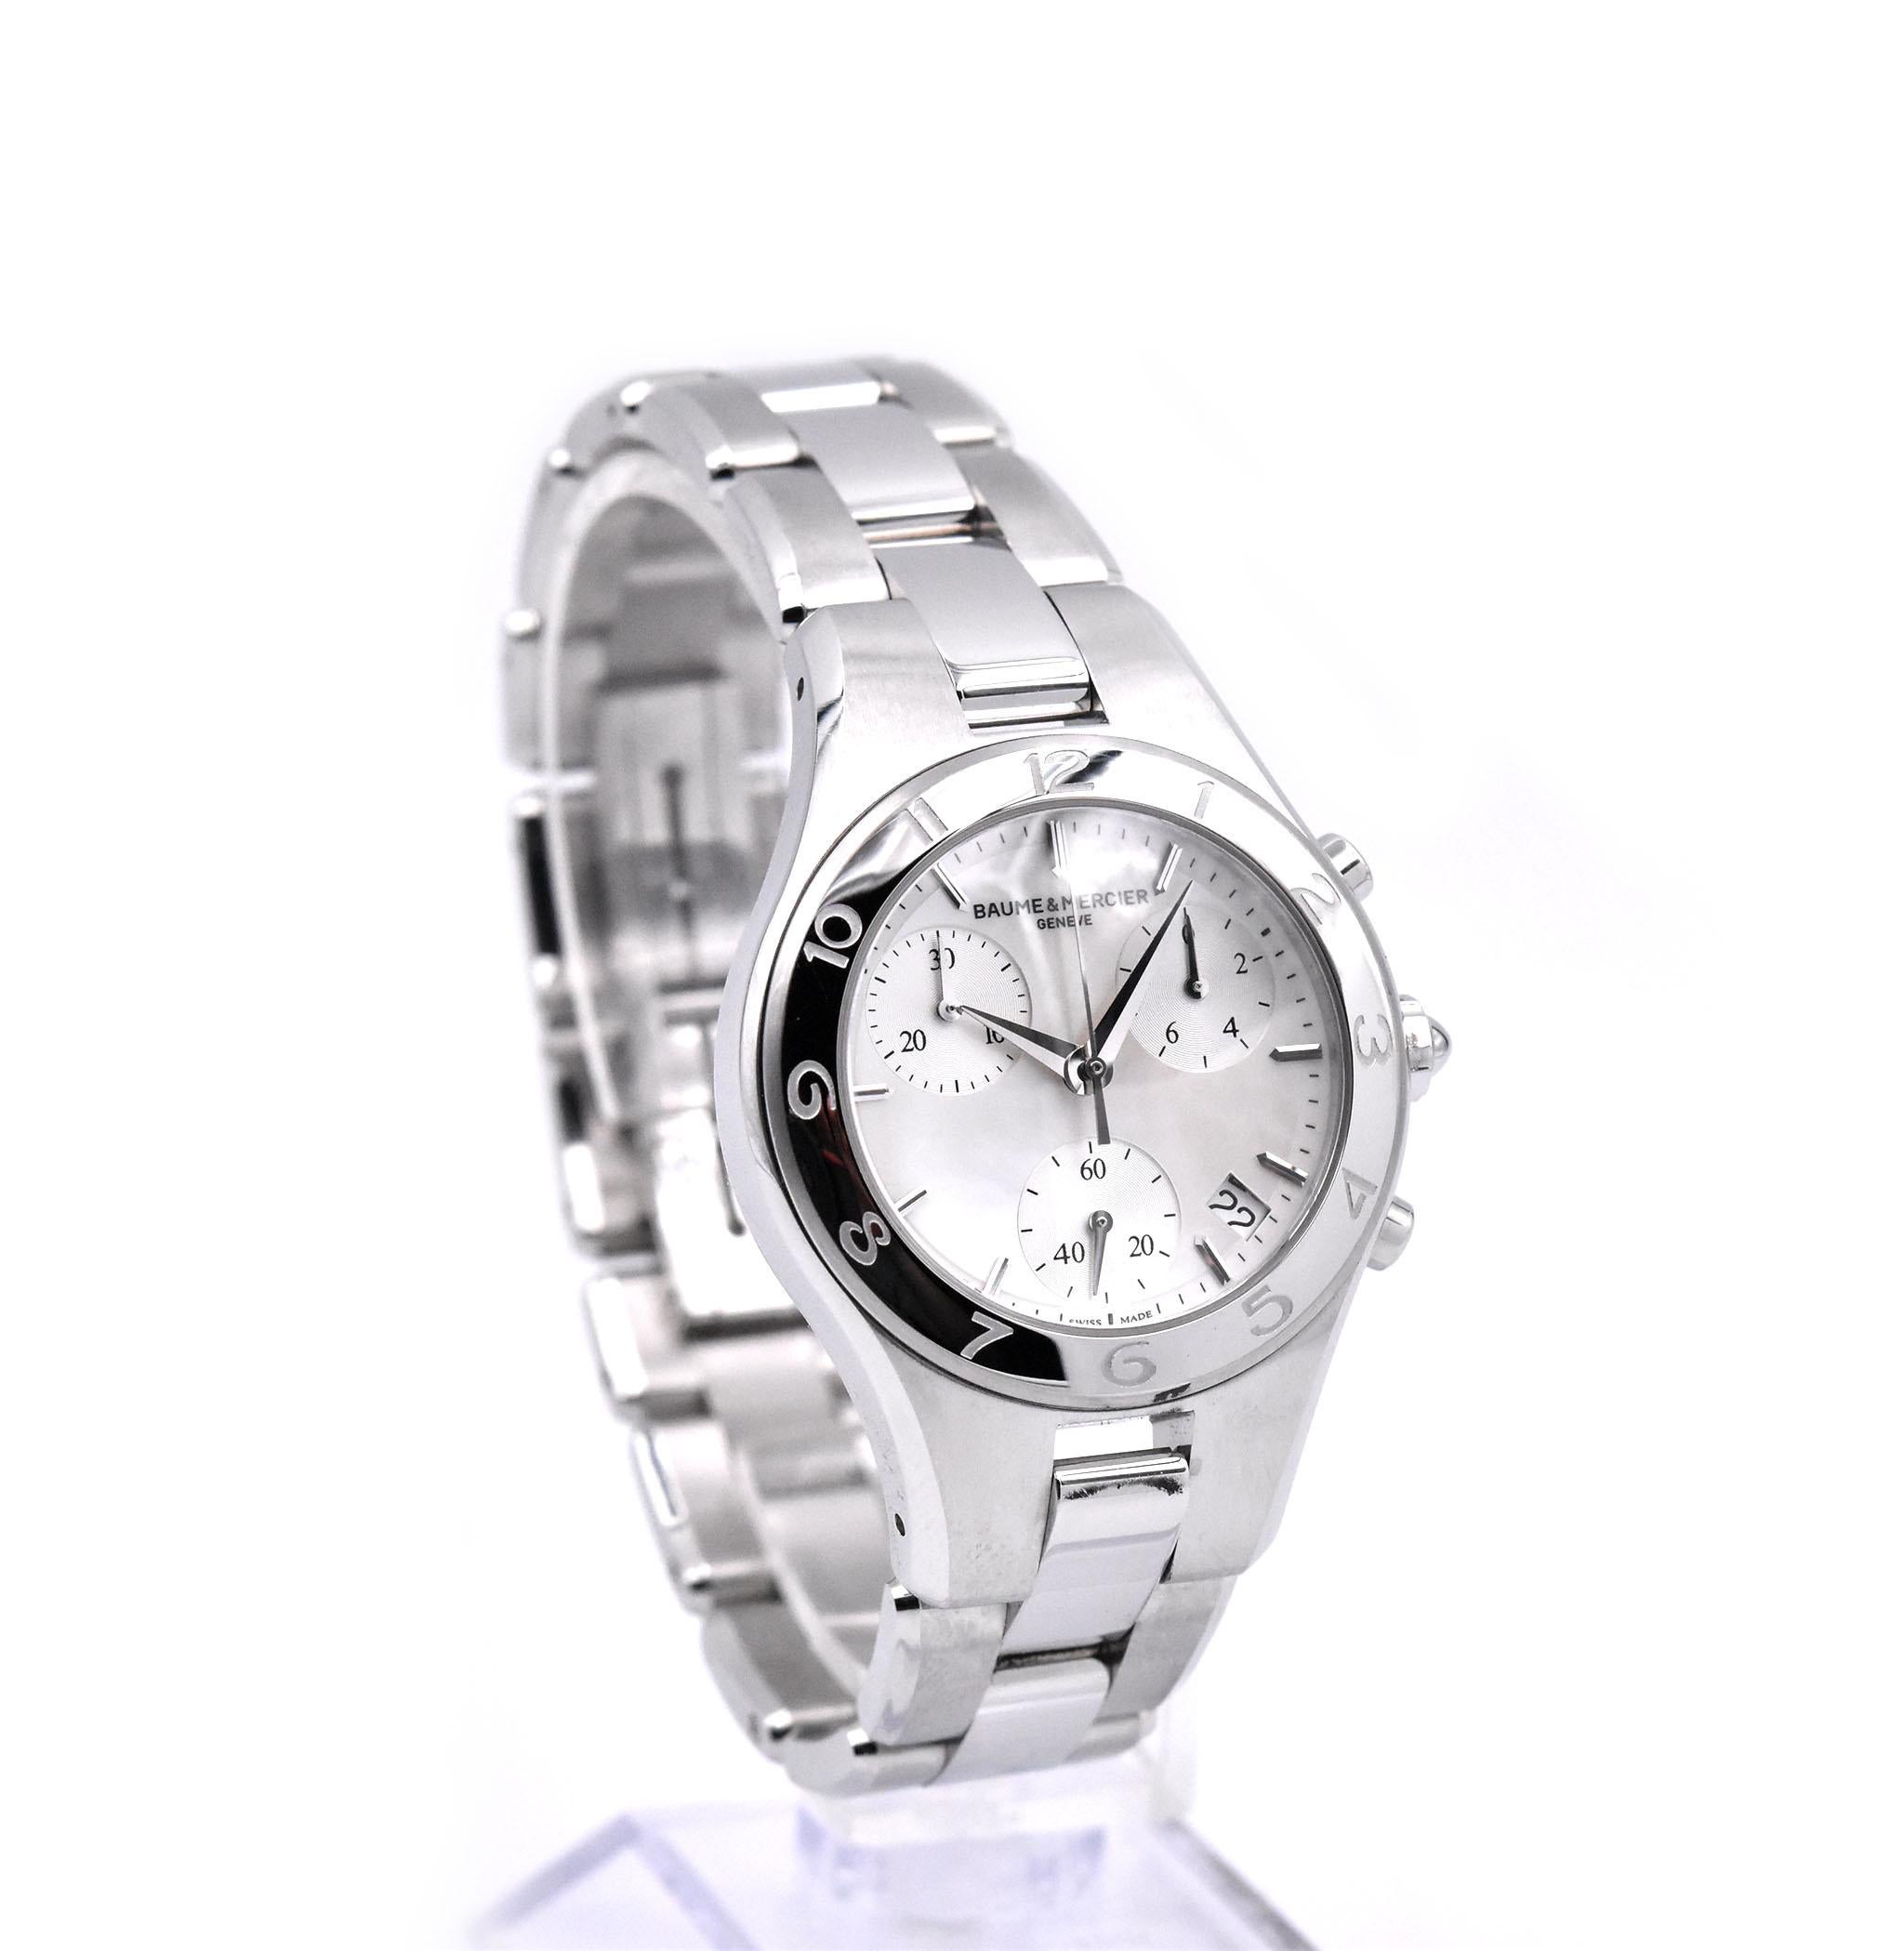 Movement: quartz
Function: hours, minutes
Case: 32mm round stainless steel case, sapphire protective crystal
Band: stainless steel bracelet with deployant clasp
Dial: white mop diamond dial, stainless steel stick hour markers
Reference #: